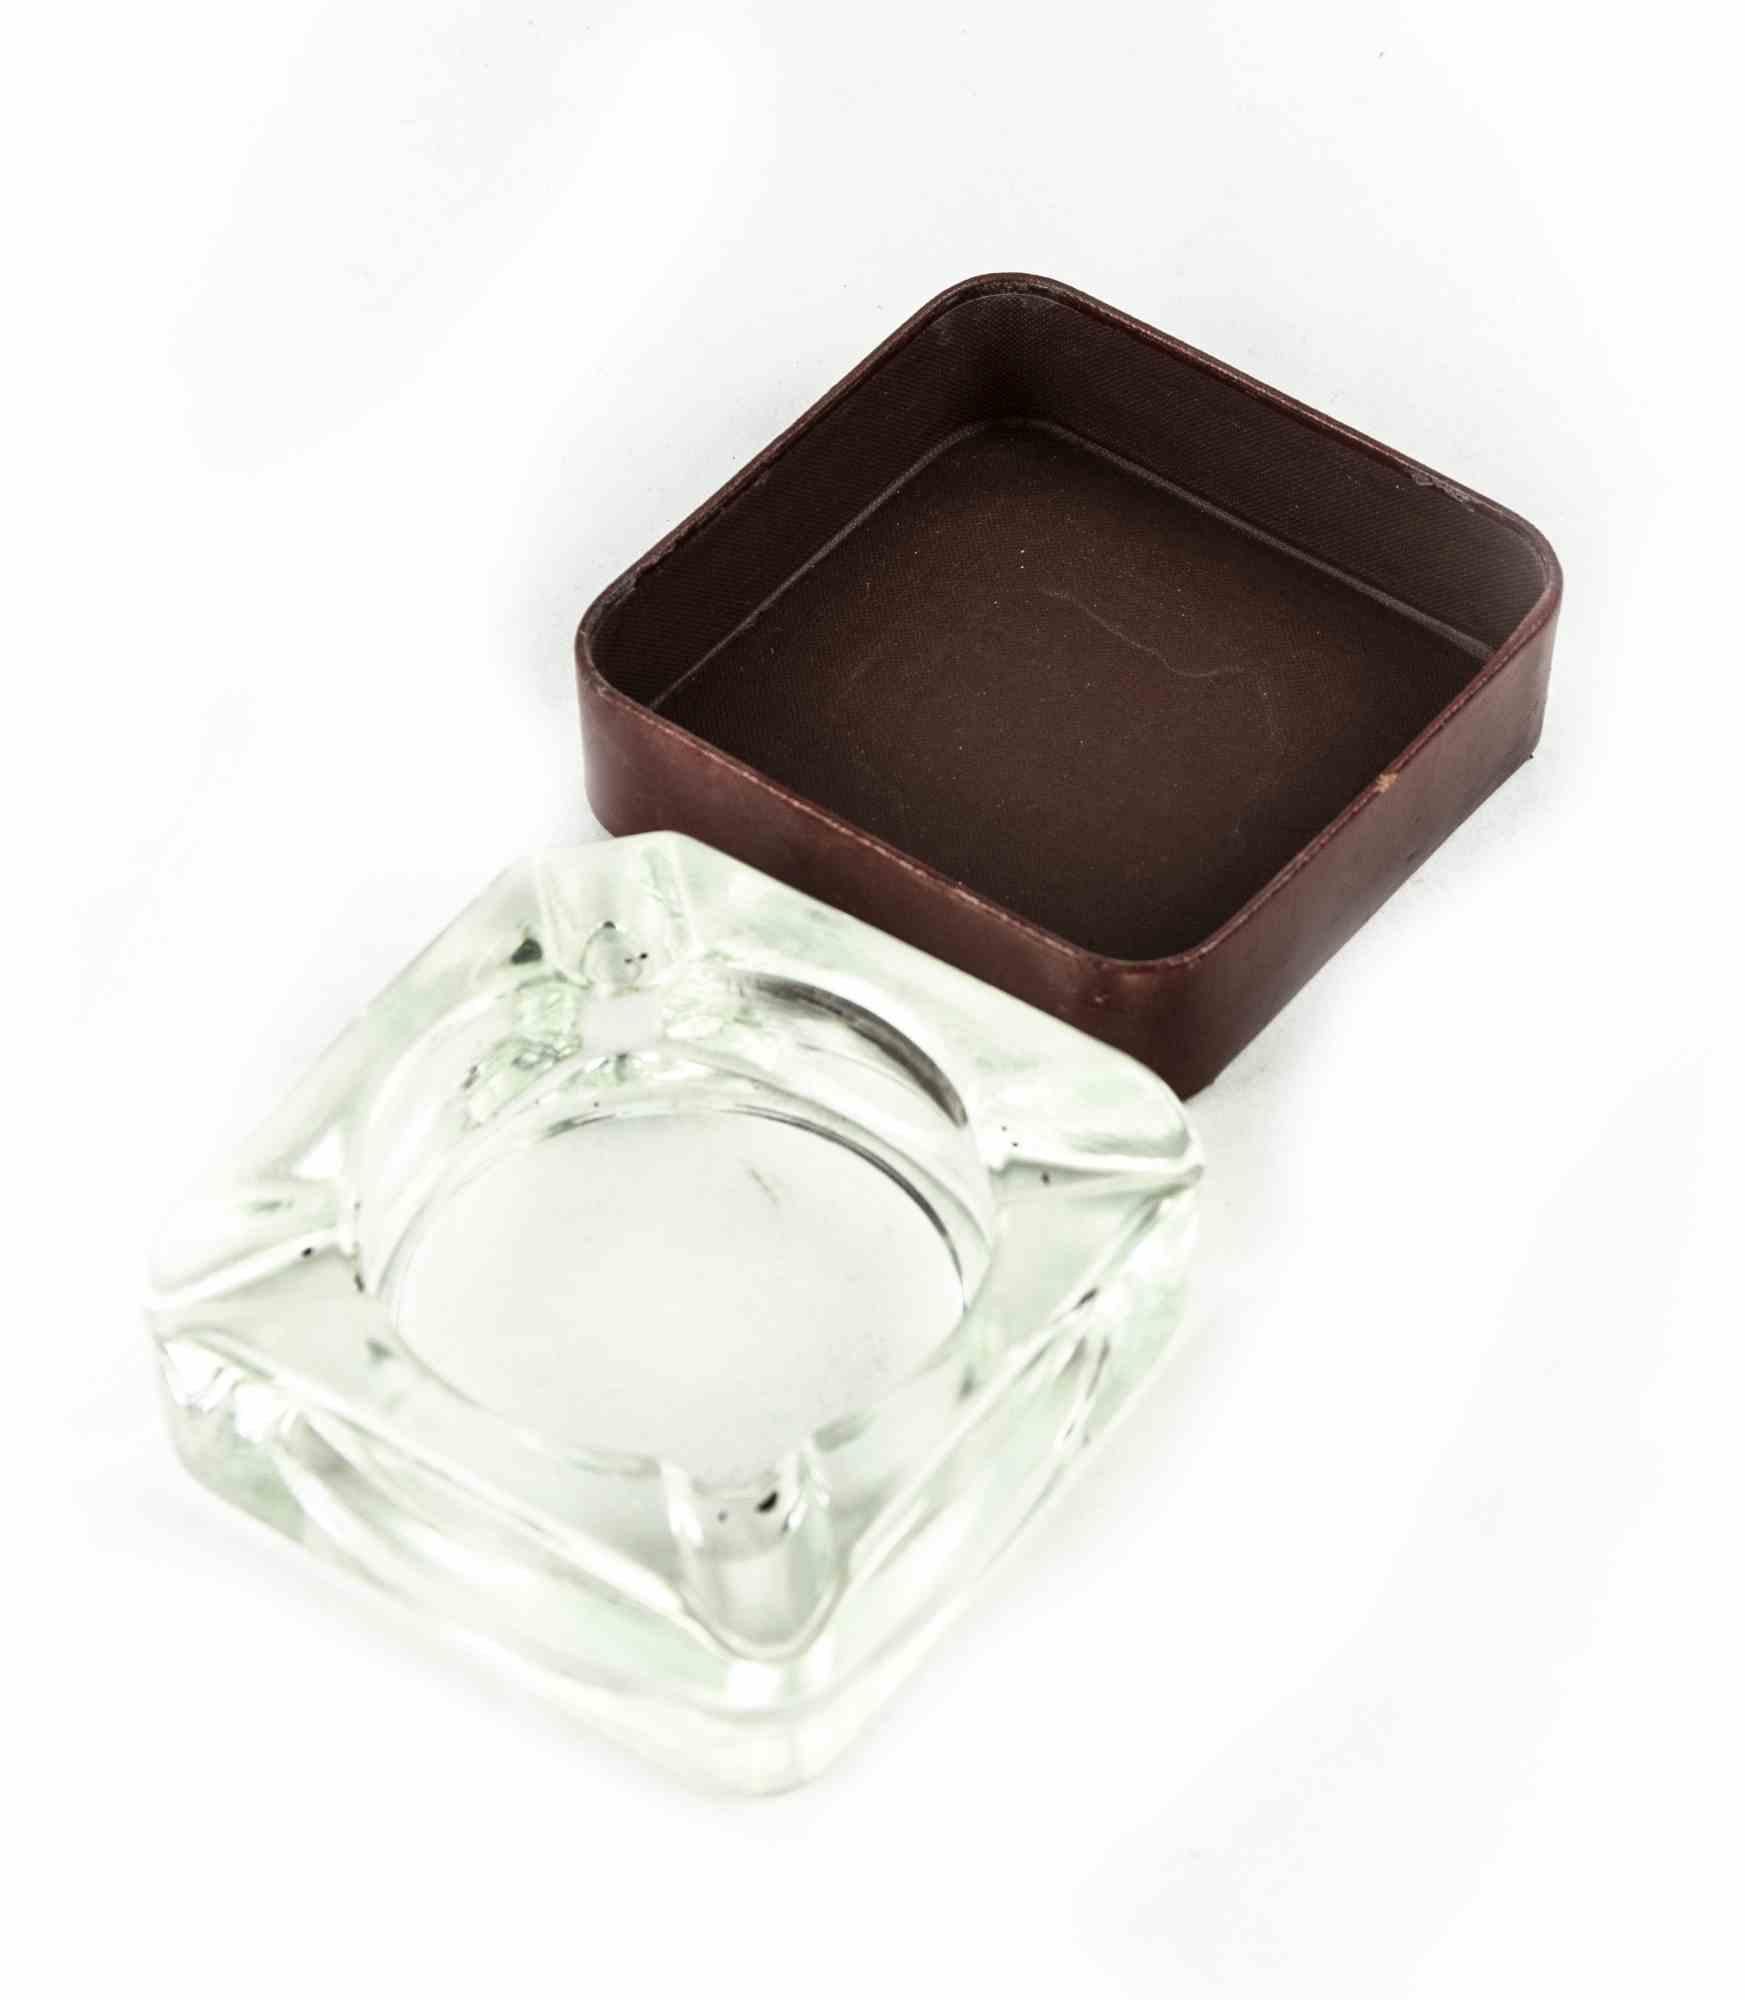 European Vintage Leather and Glass Ashtray, 1970s